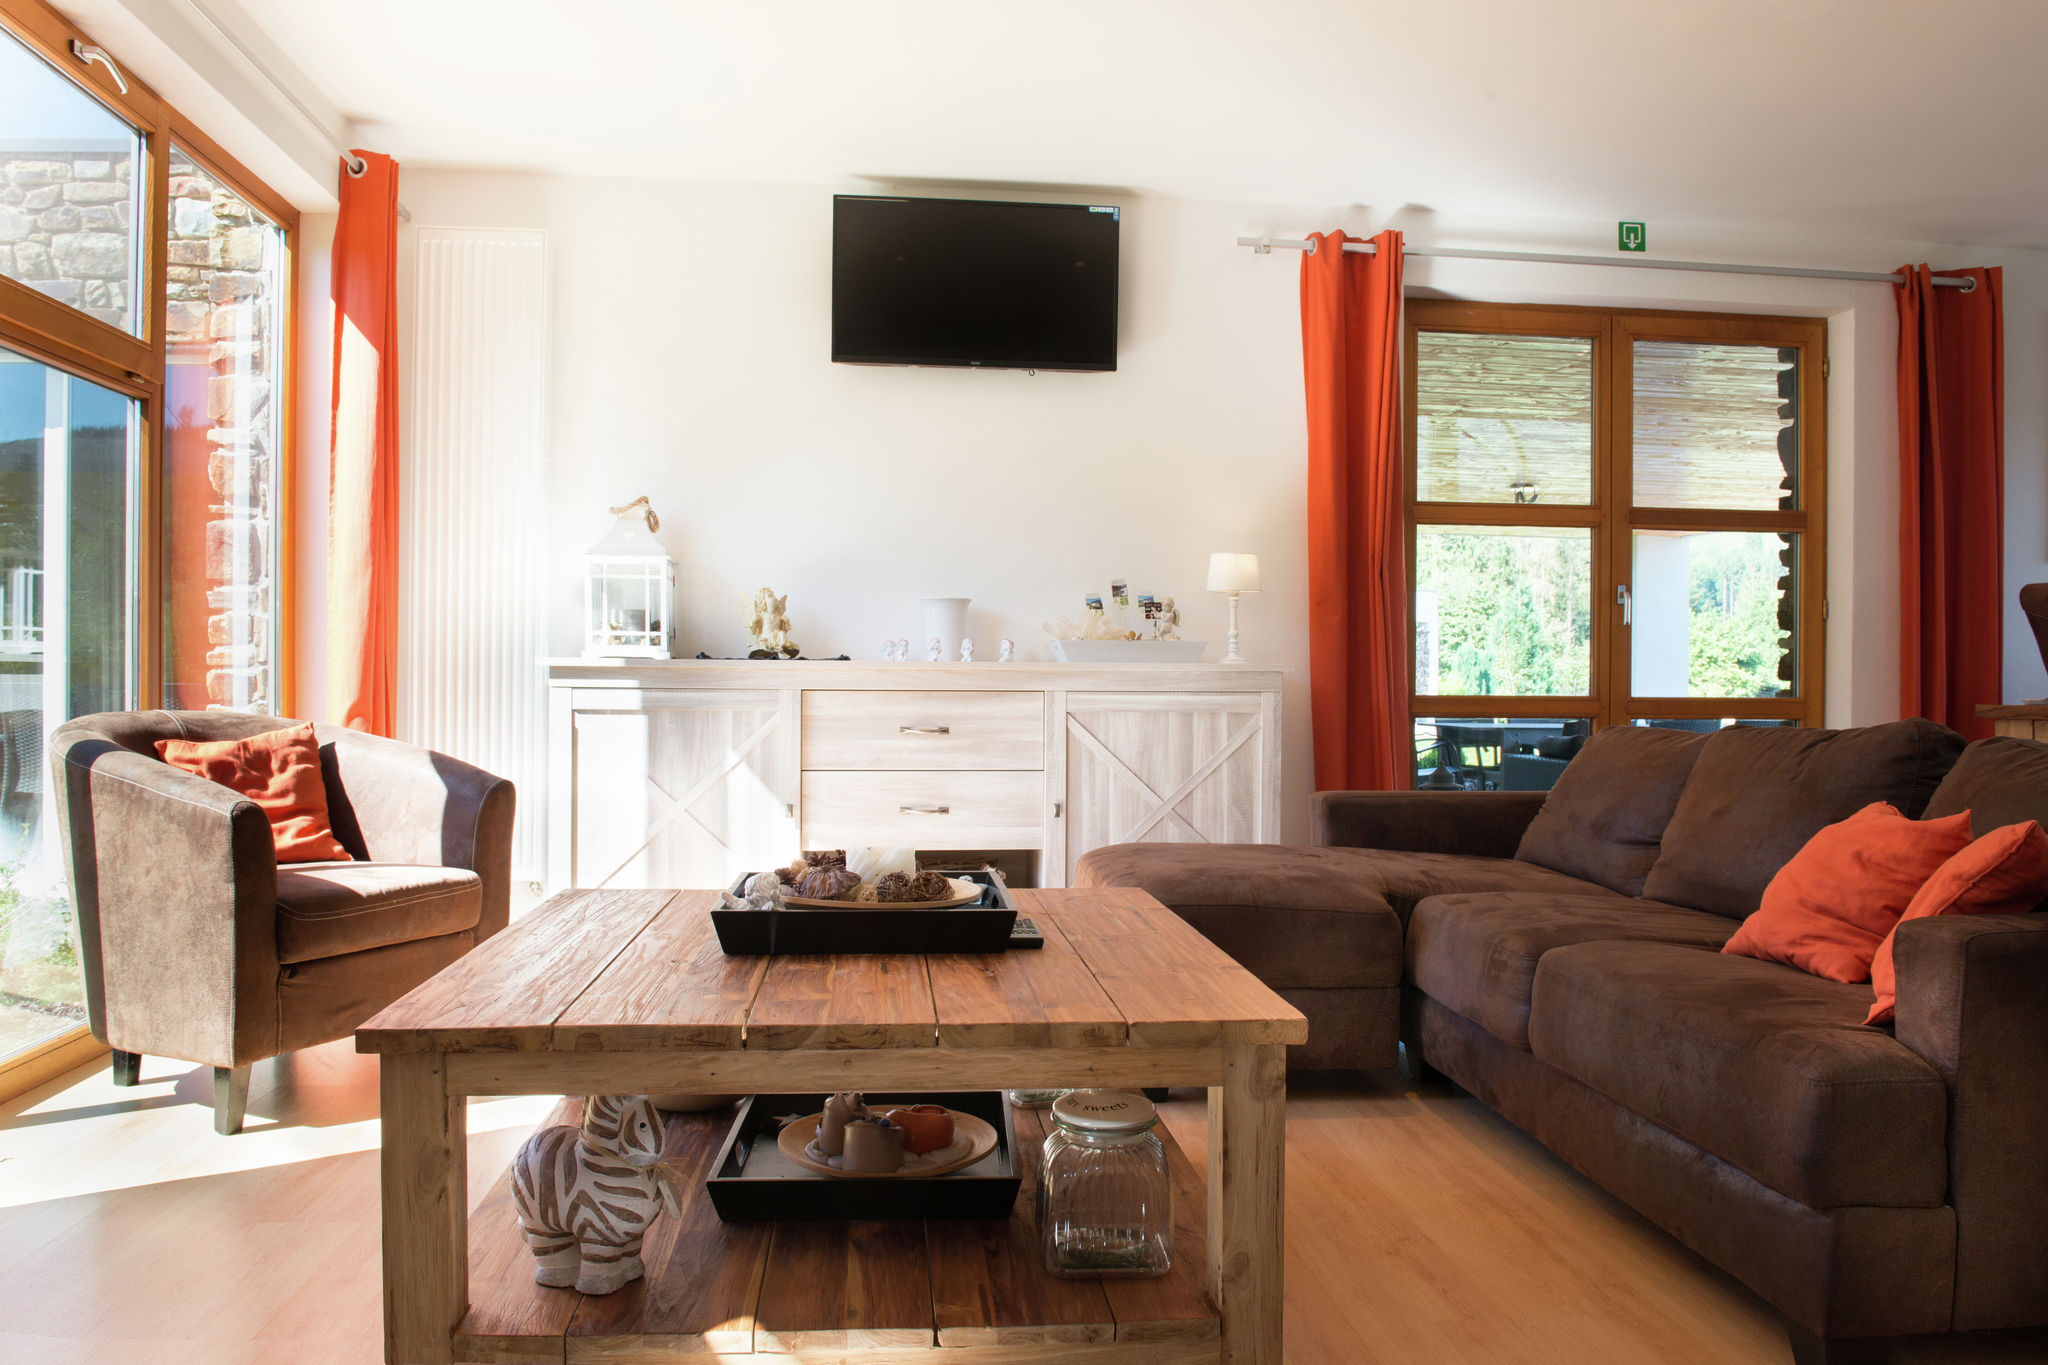 Holiday Home in Stoumont, close to the town of Spa